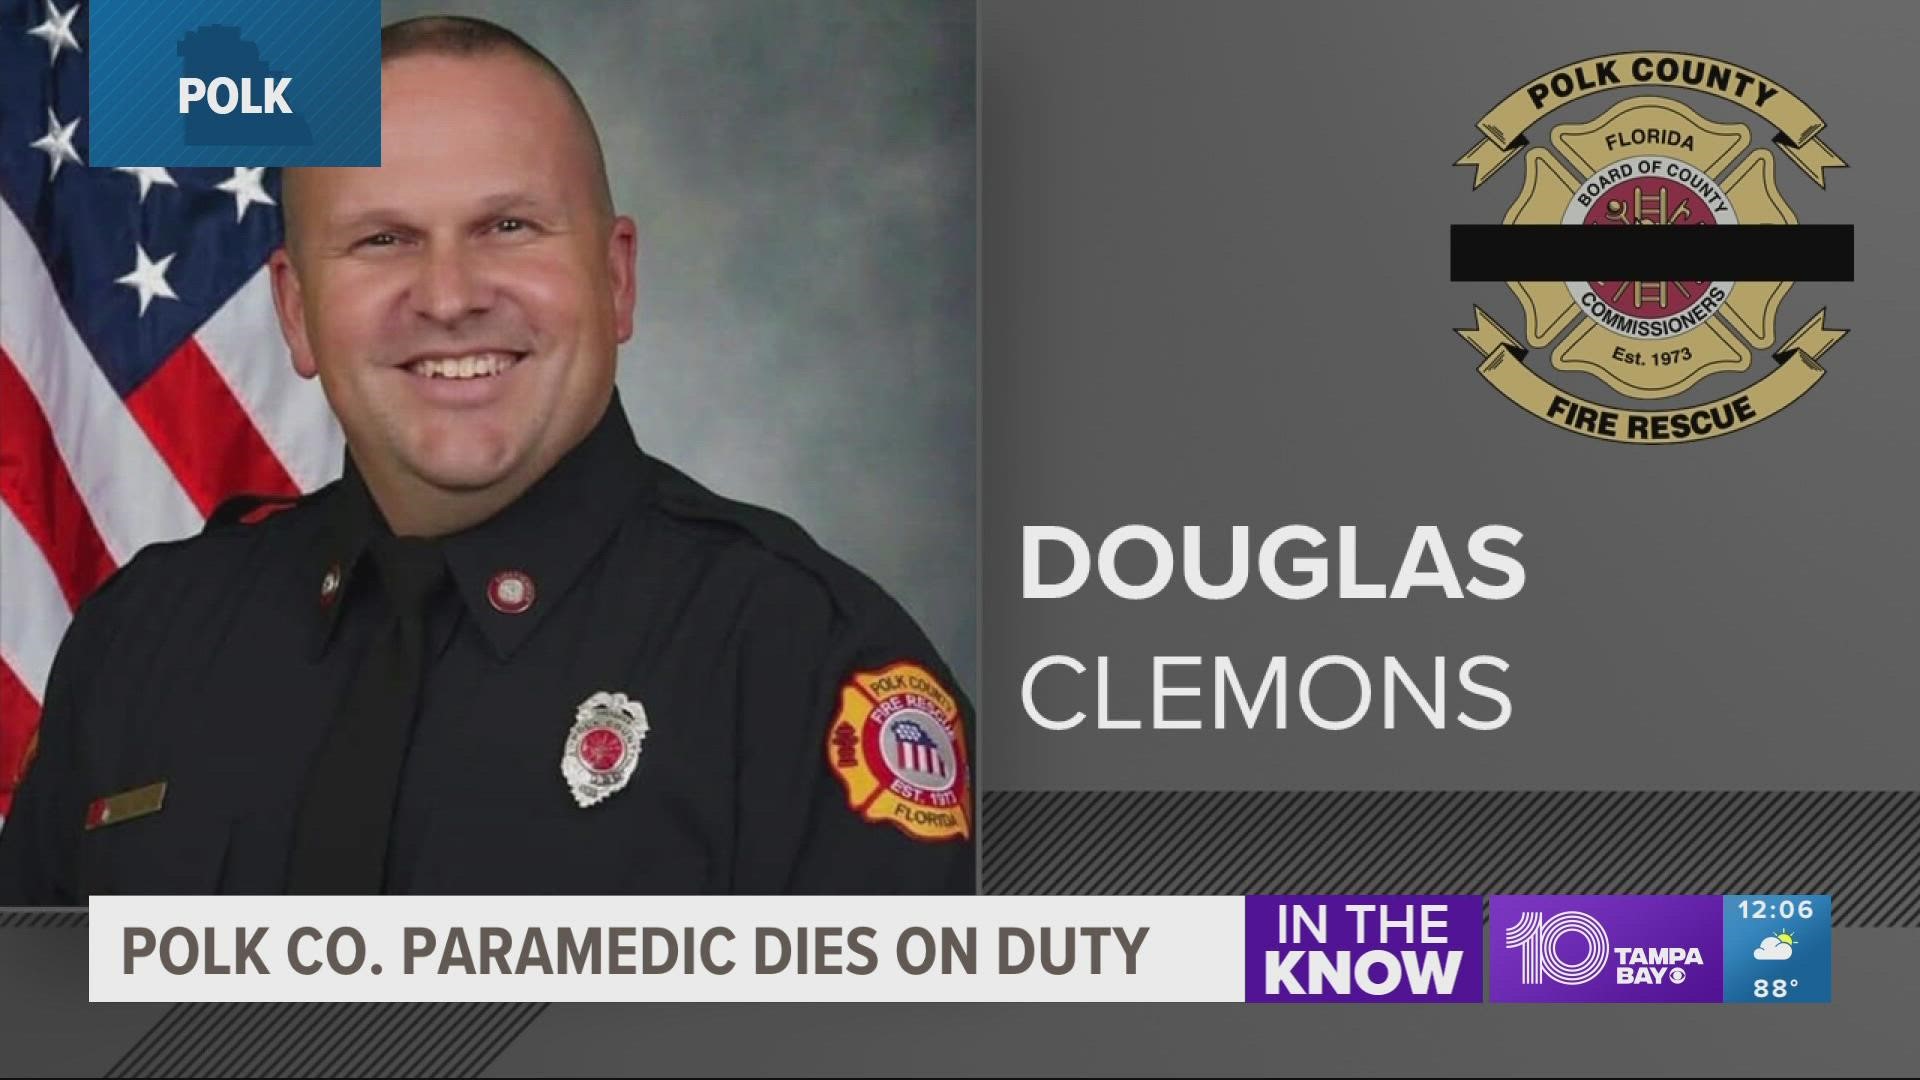 Douglas Clemons served in the fire rescue for 27 years.